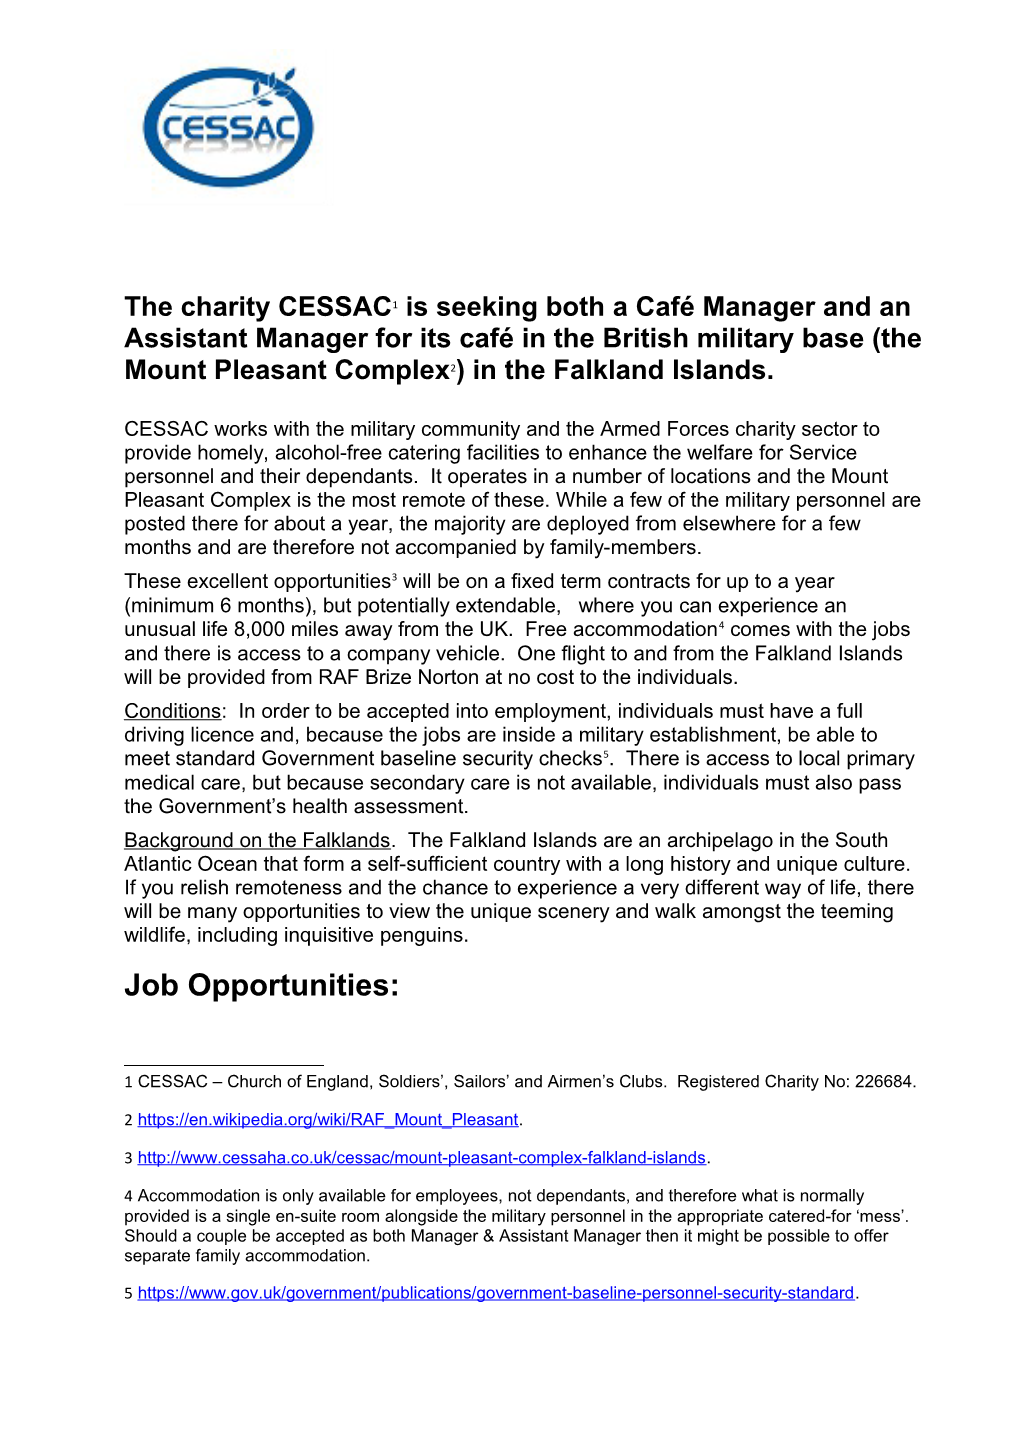 The Charity CESSAC 1 Is Seeking Both a Café Manager and an Assistant Managerforitscaféin